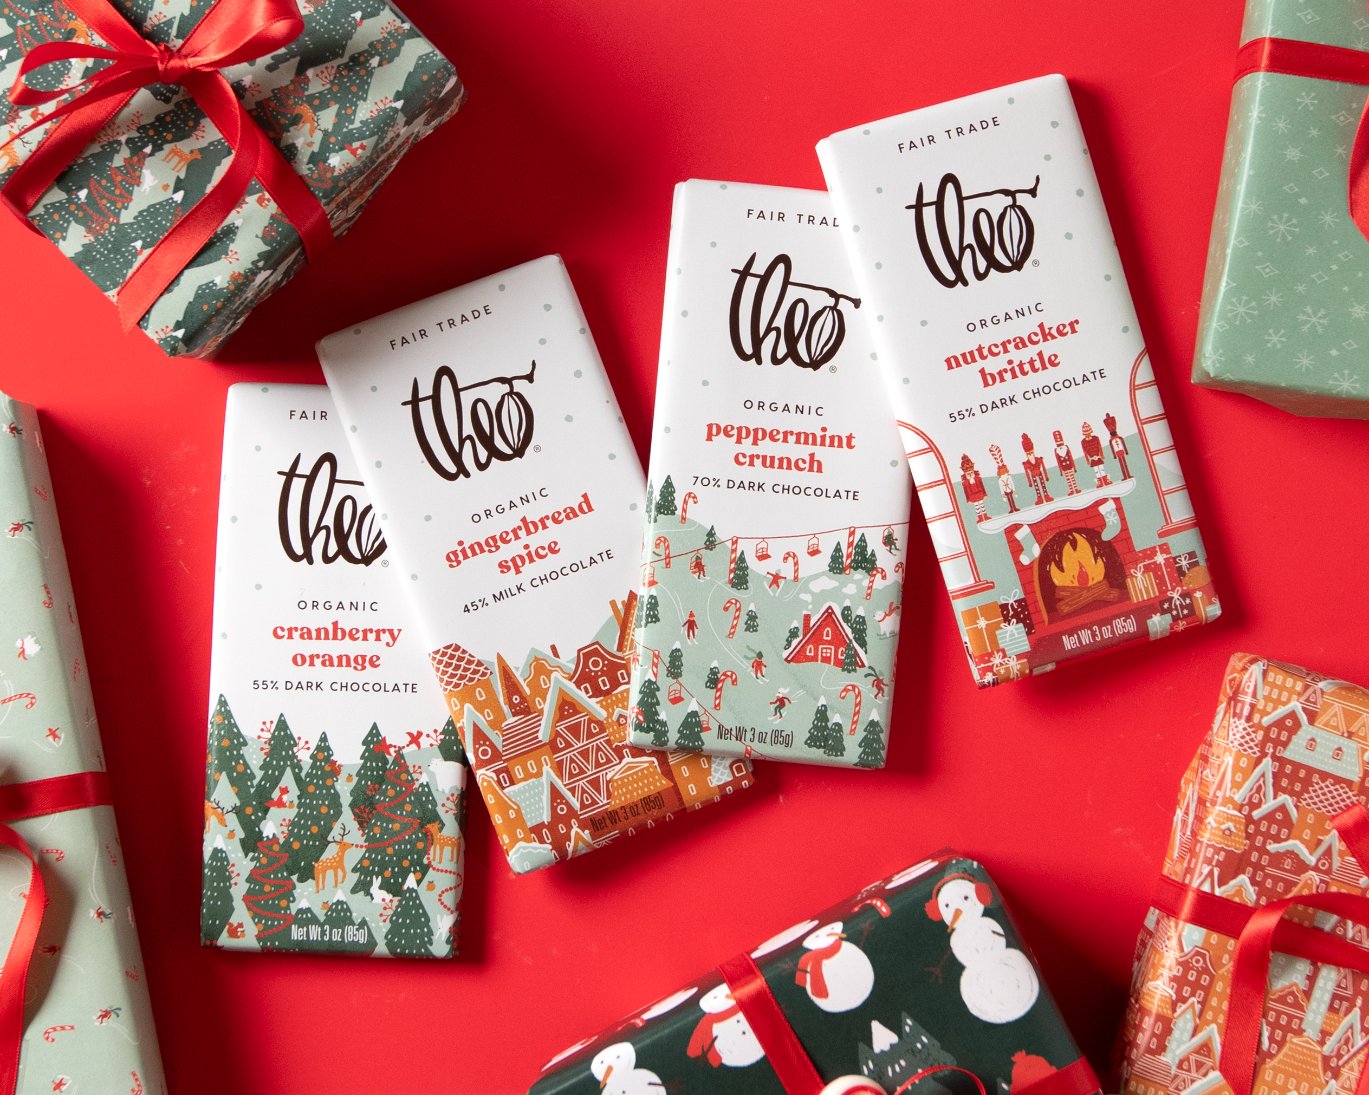 Theo Chocolate’s Holiday Redesign Looks Like Christmas and Tastes Like Success